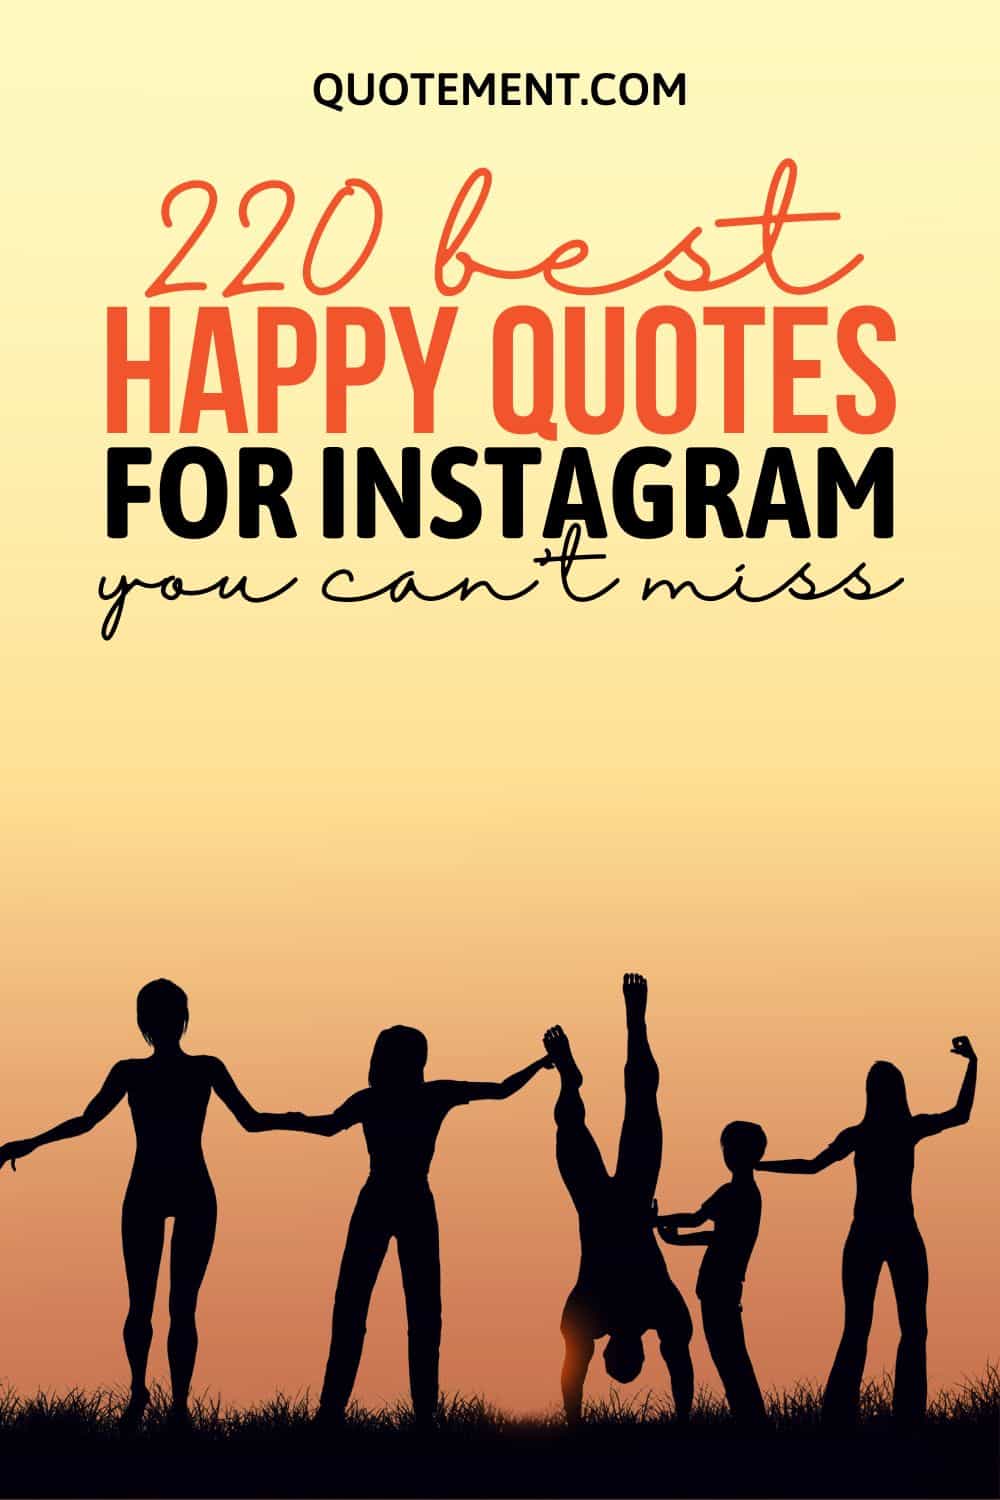 Top 220 Happy Quotes For Instagram To Spread Good Vibes